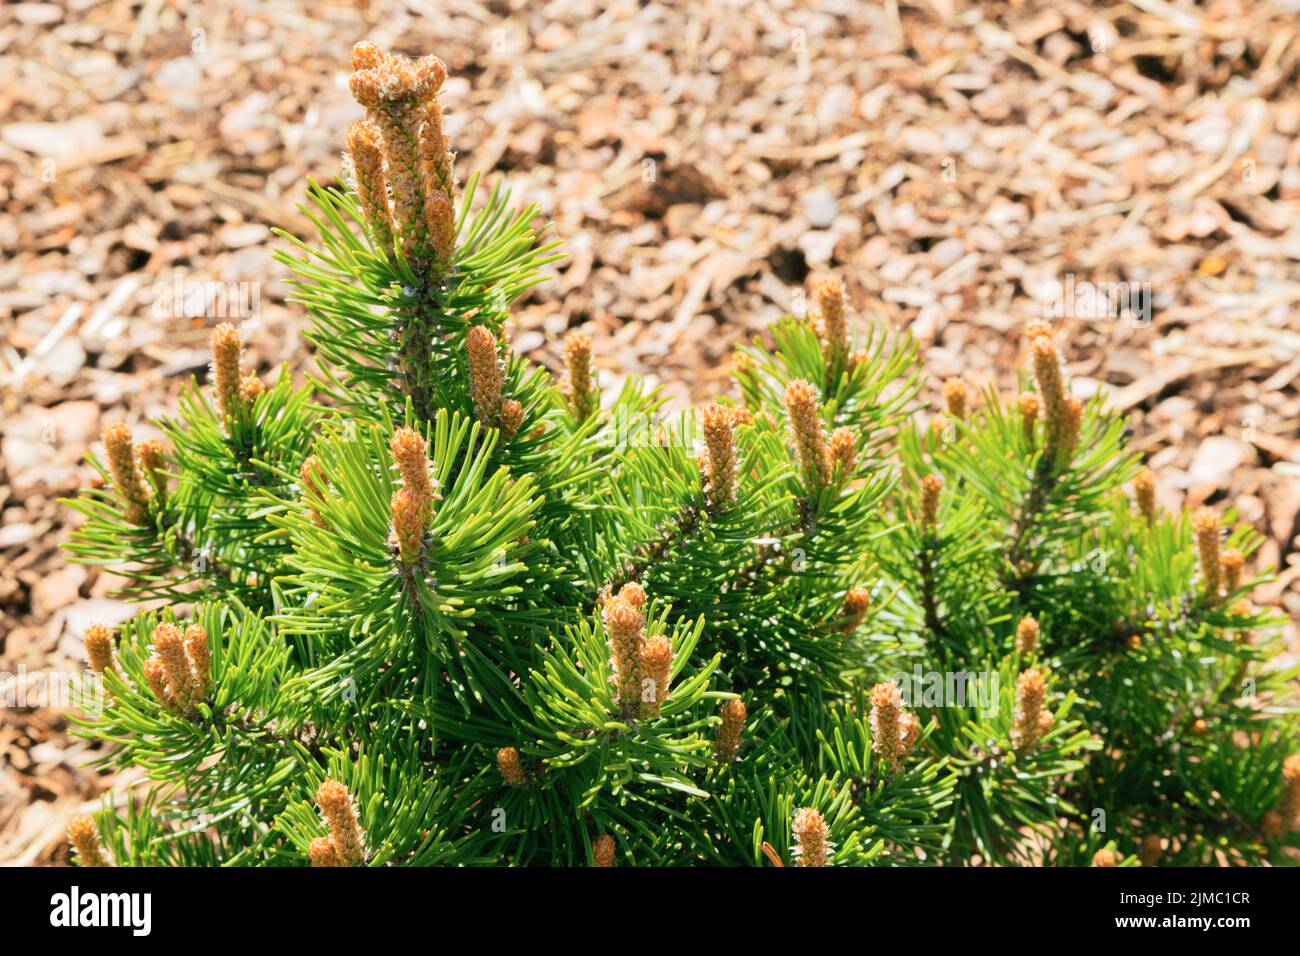 A budding mountain pine (pinus mugo) in spring with mulch in the background. Stock Photo